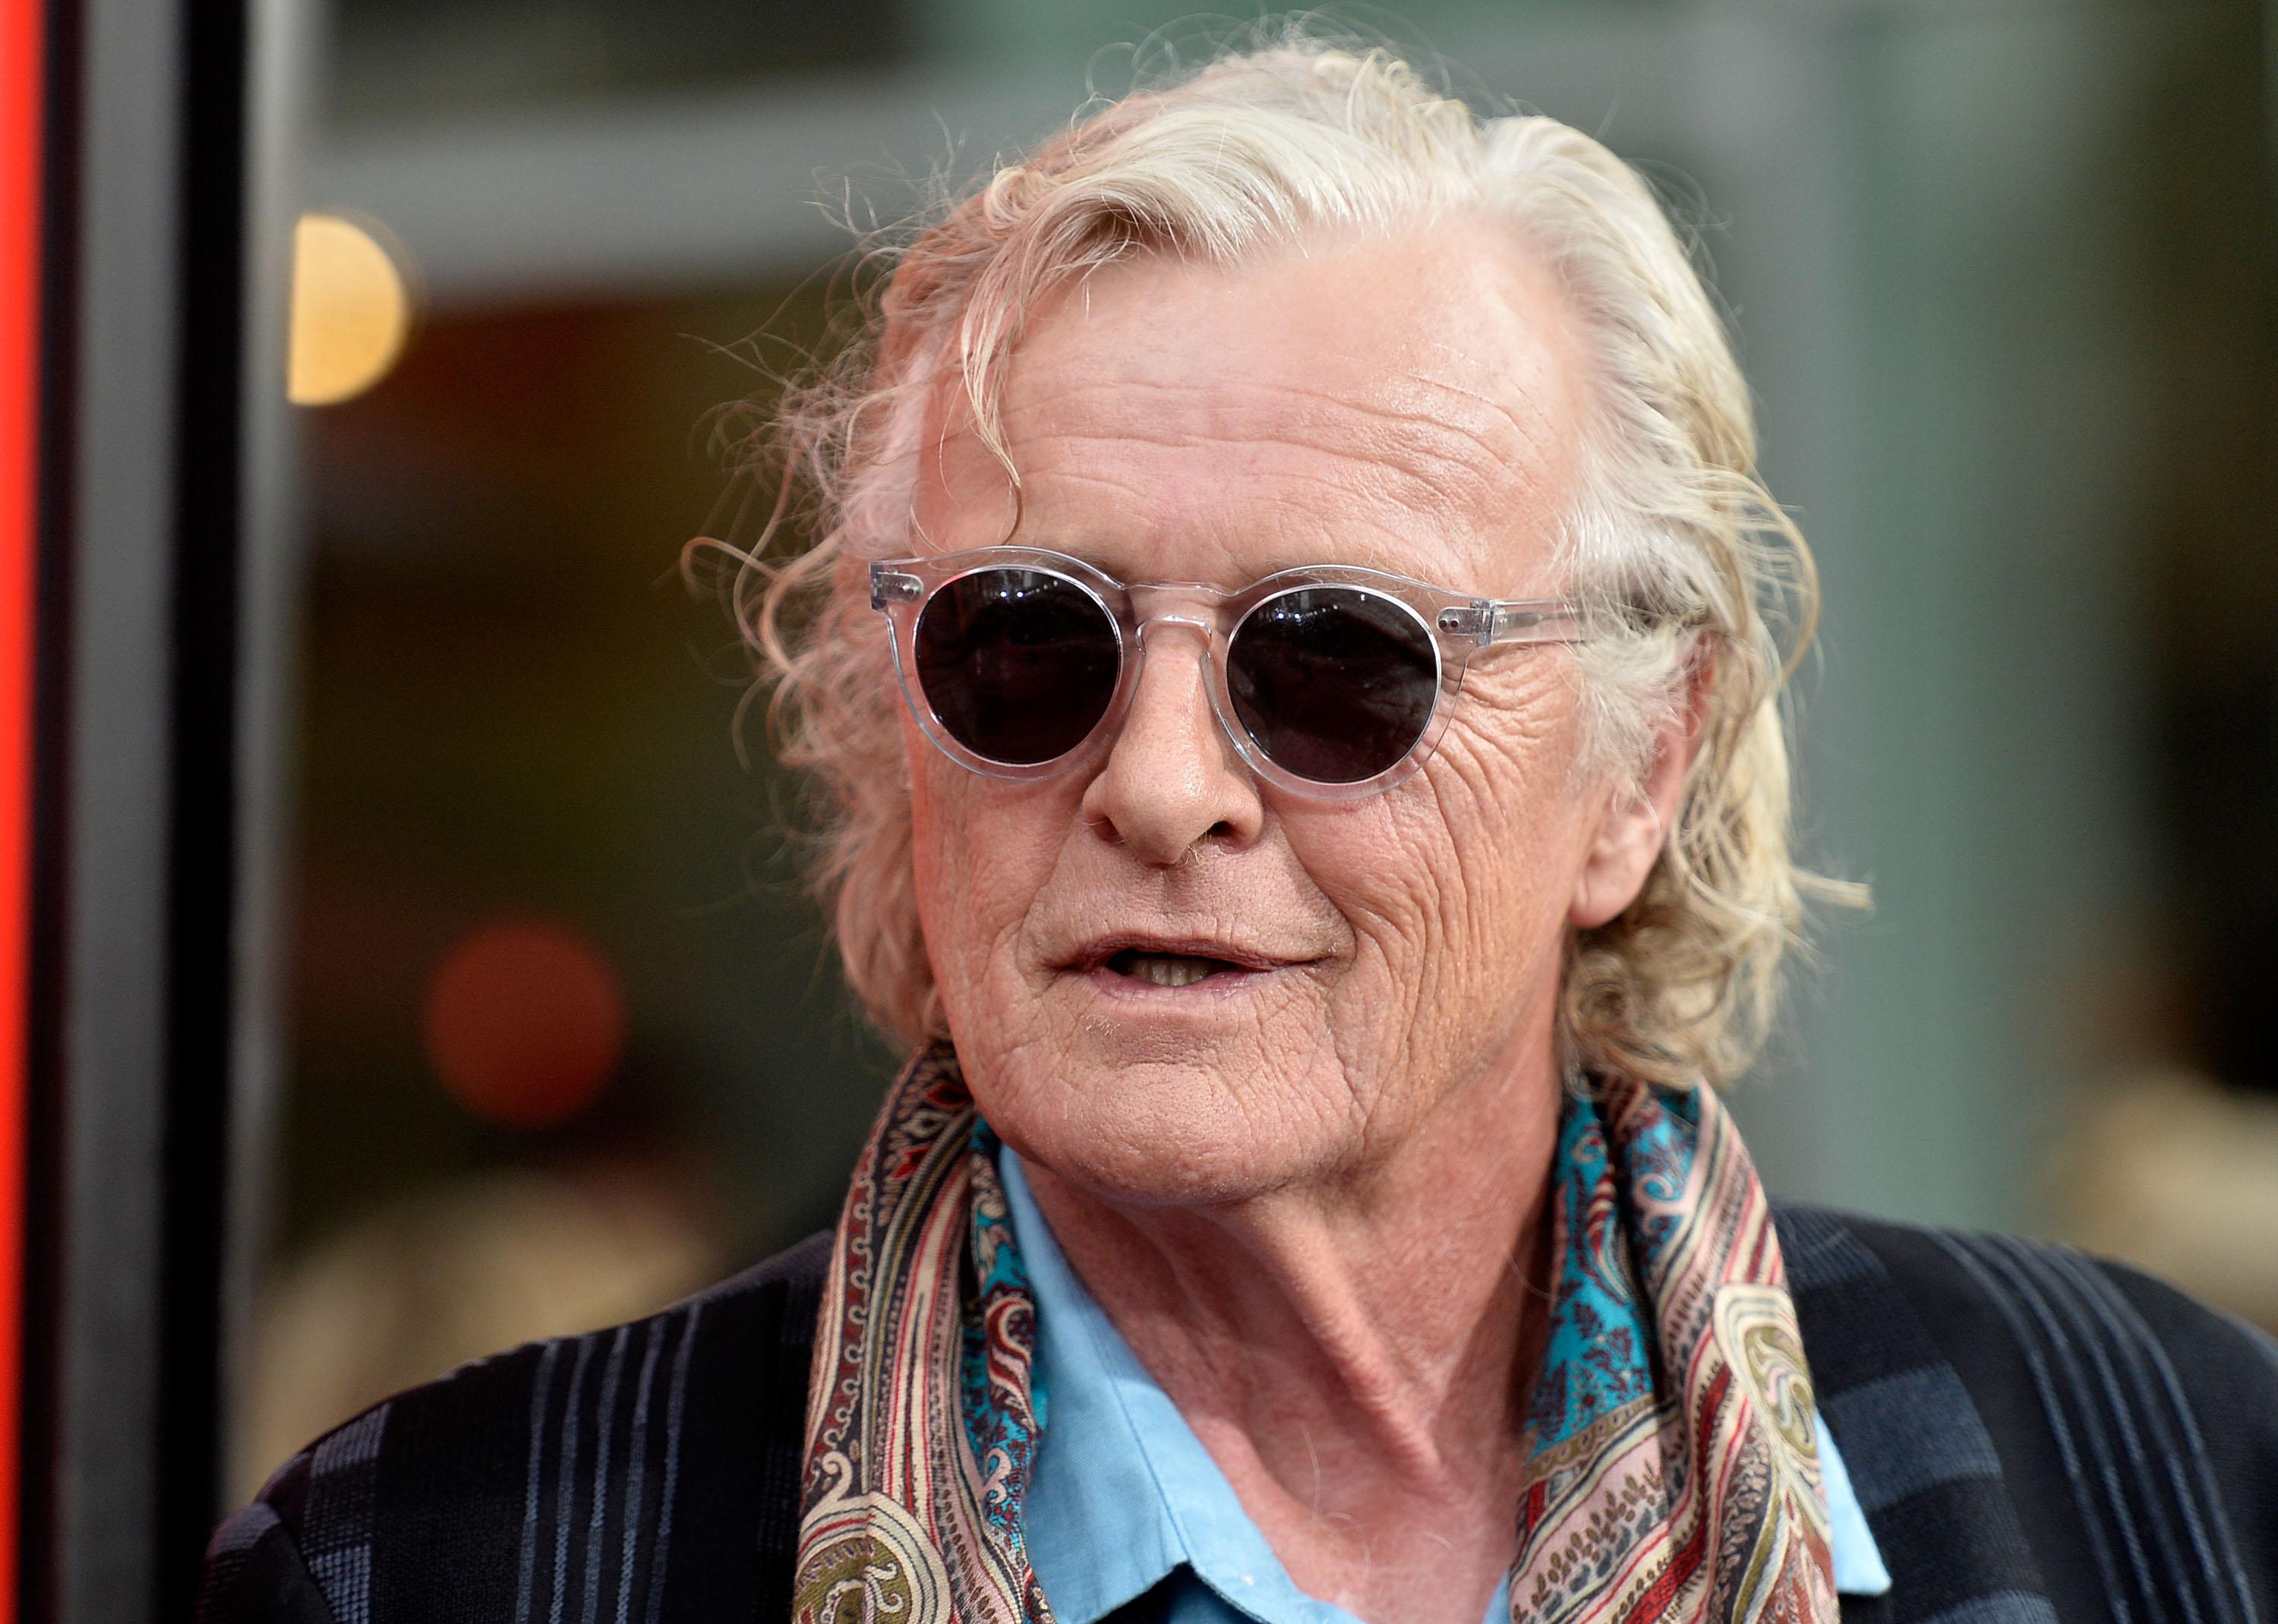 Rutger Hauer attends the premiere of HBO's 'True Blood' Season 6 in 2013.